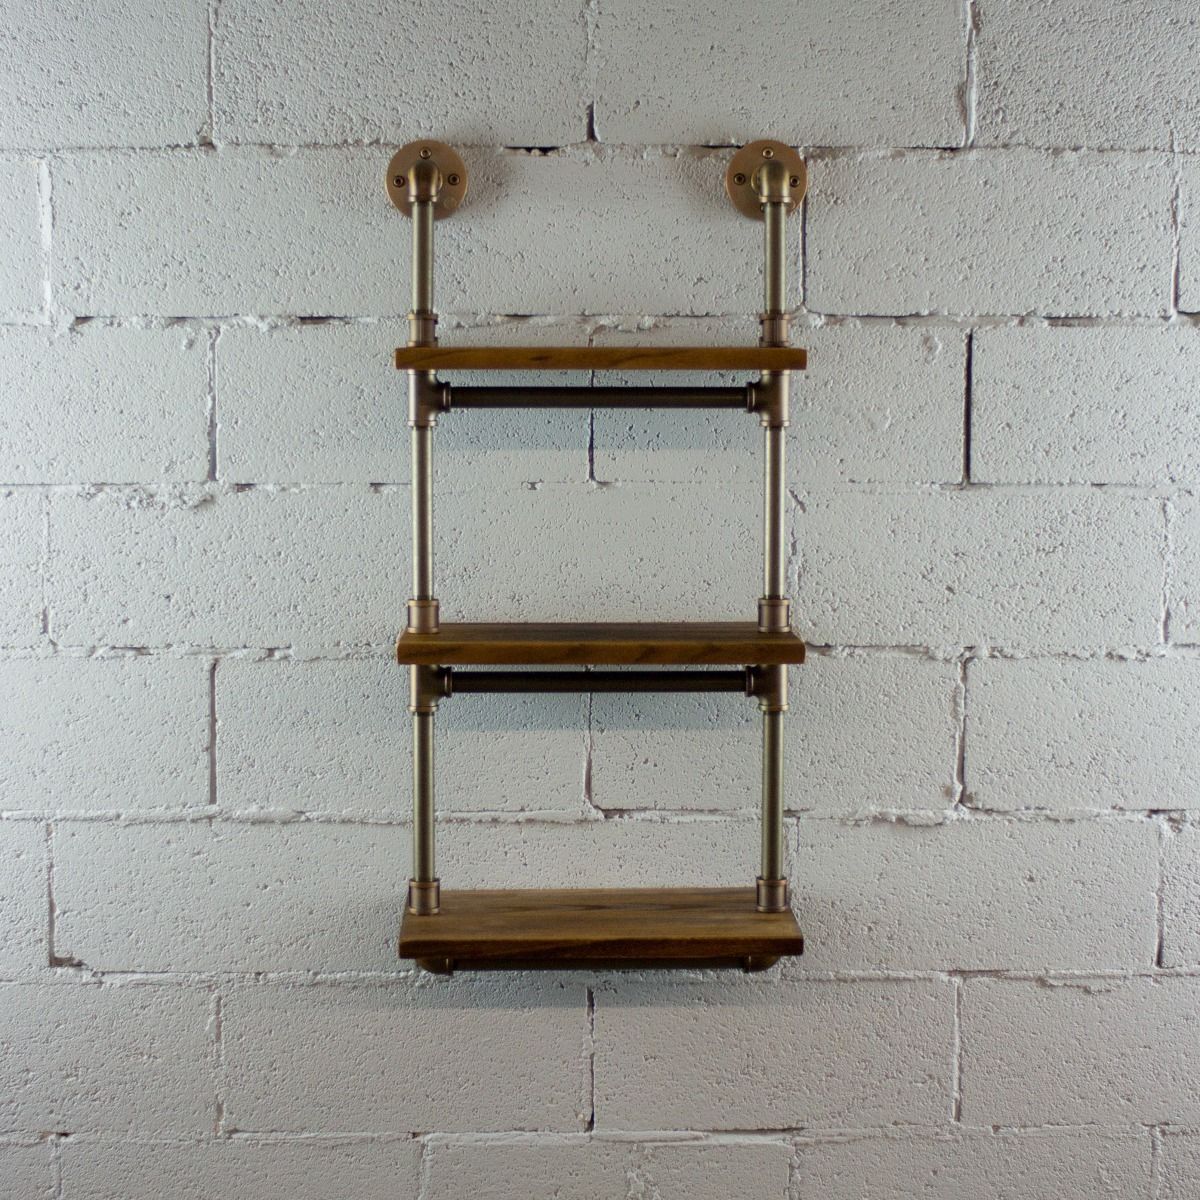 Three Tier Wall Mounted Shelves